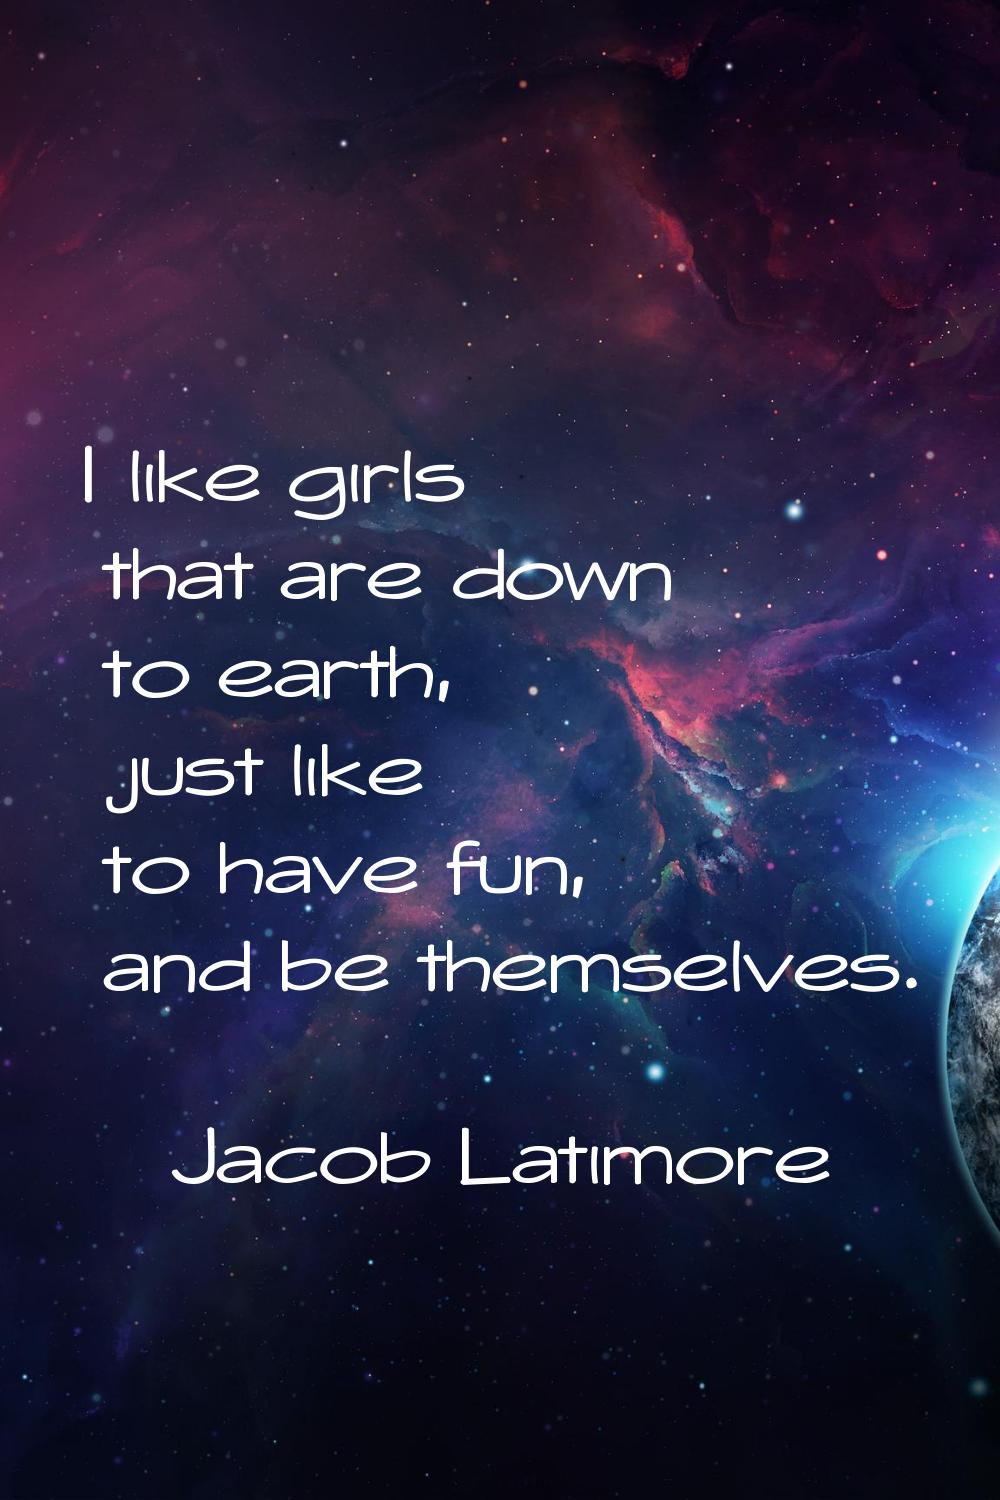 I like girls that are down to earth, just like to have fun, and be themselves.